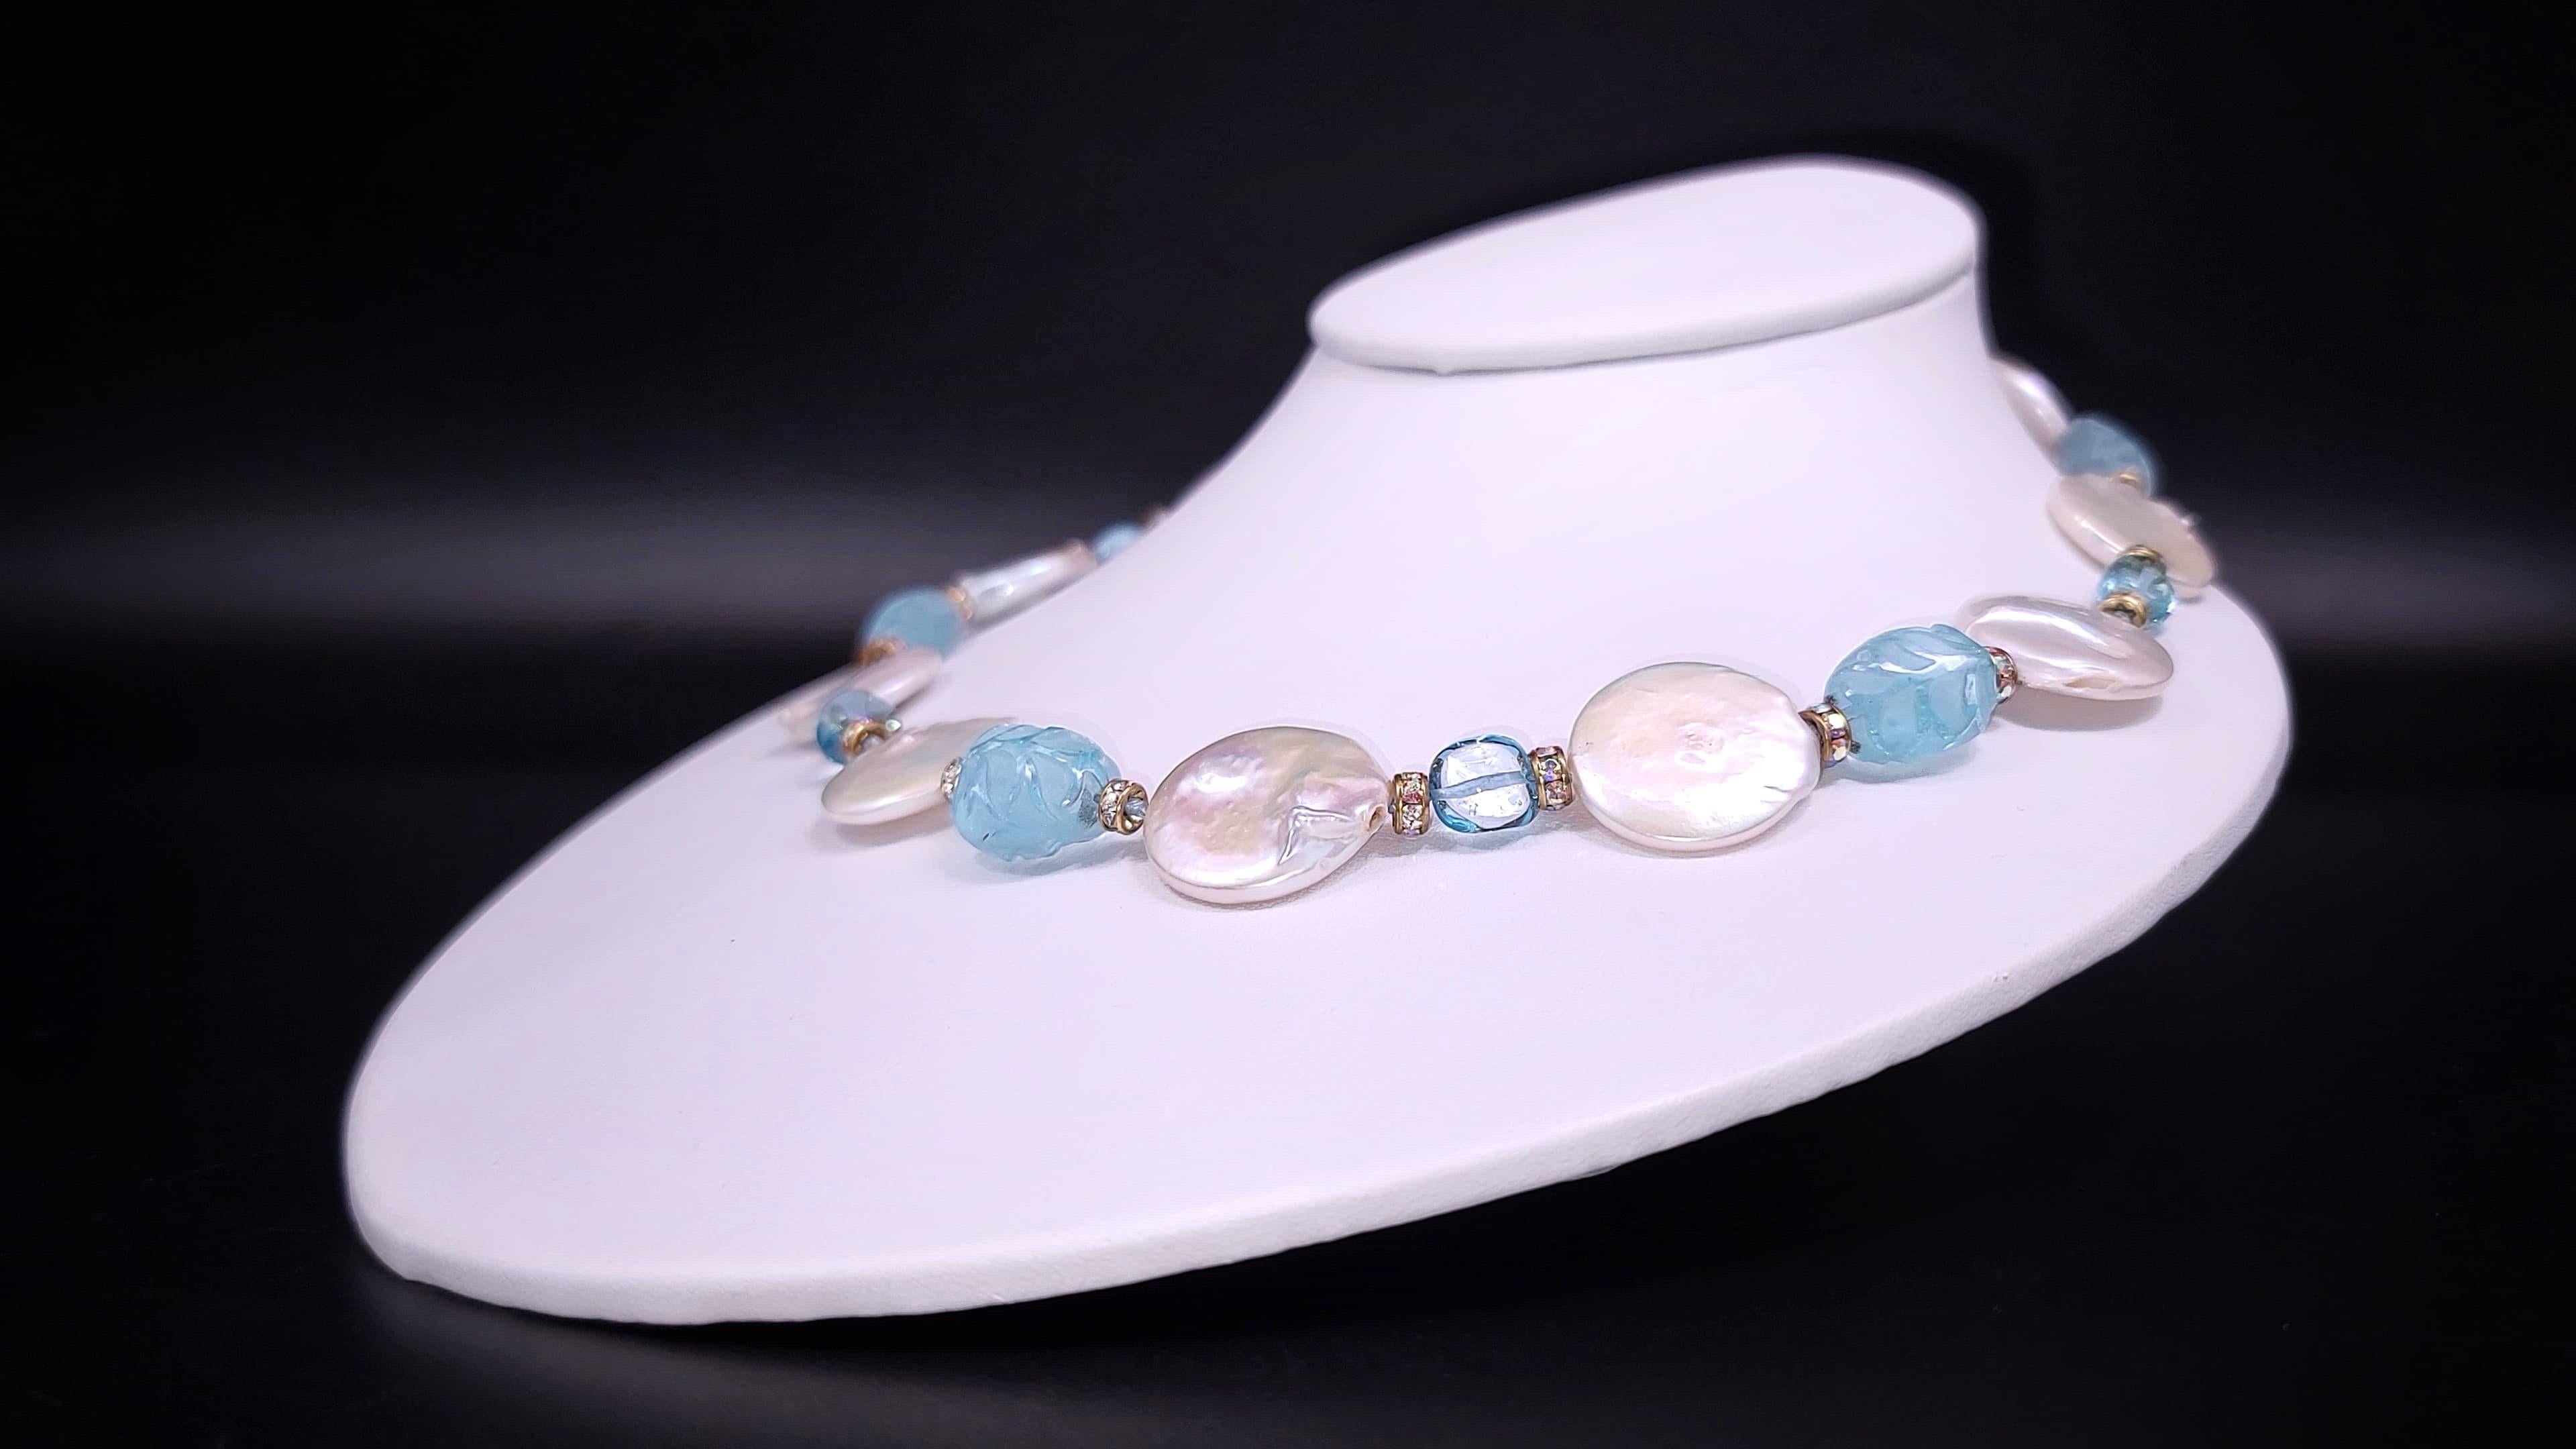 aquamarine and pearl necklace